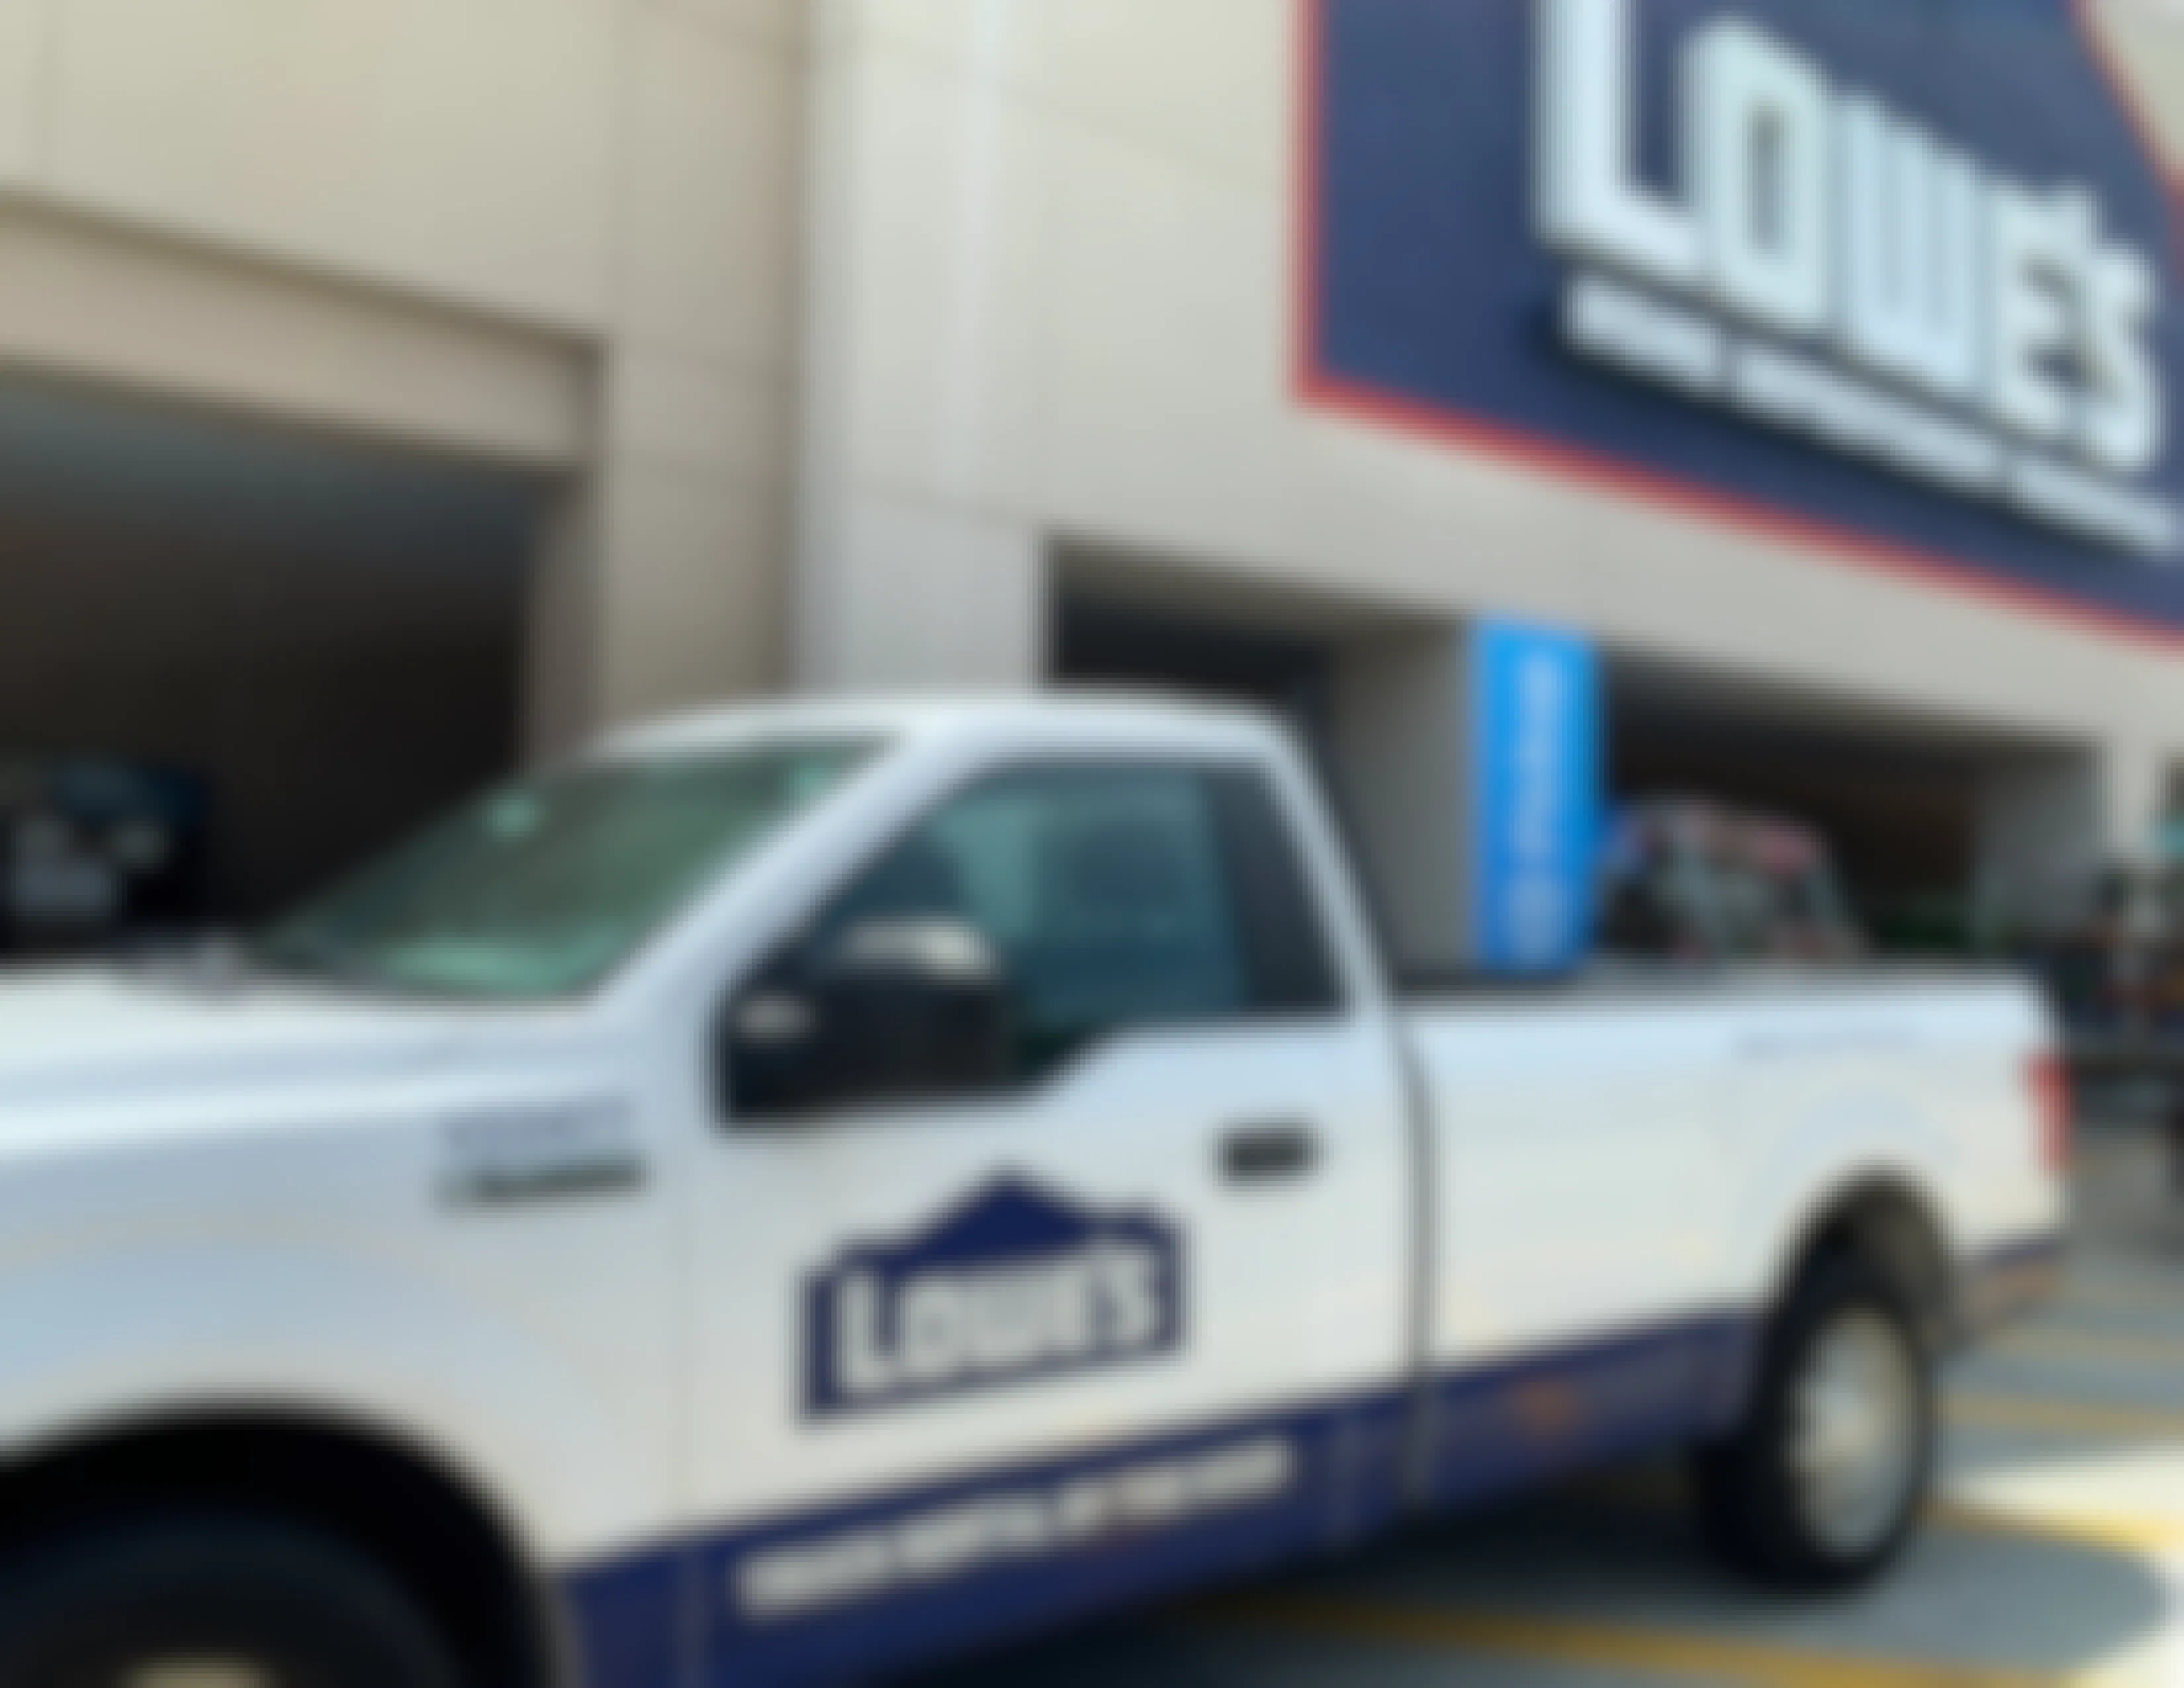 Lowe's rental truck parked infront of Lowe's store